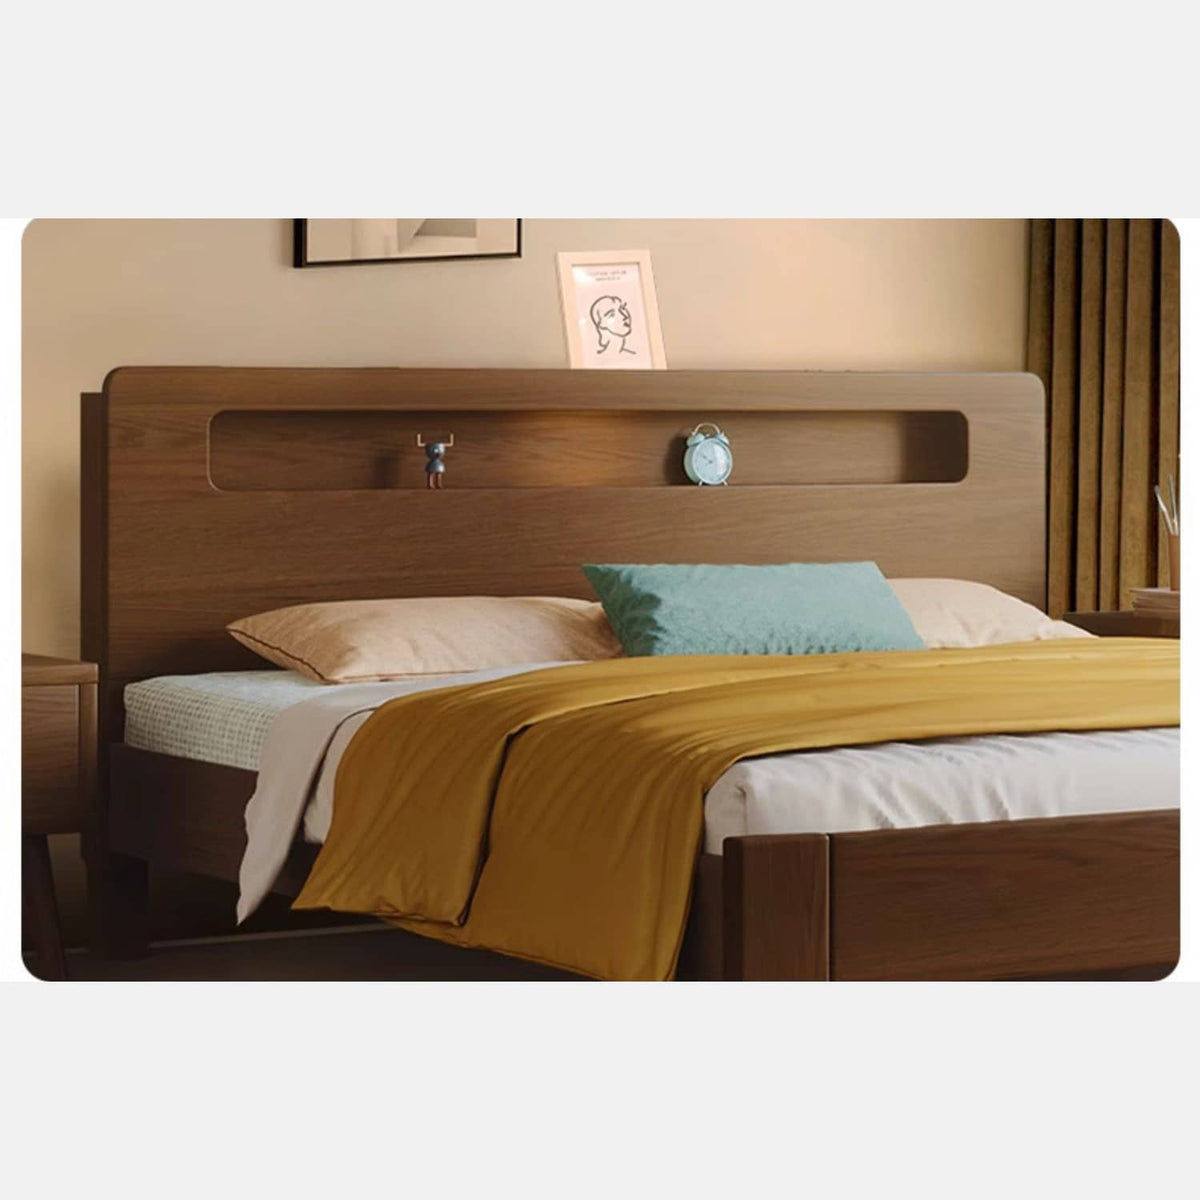 Sturdy and Versatile Pine-Brown Rubber Wood Bed Frame hmak-238